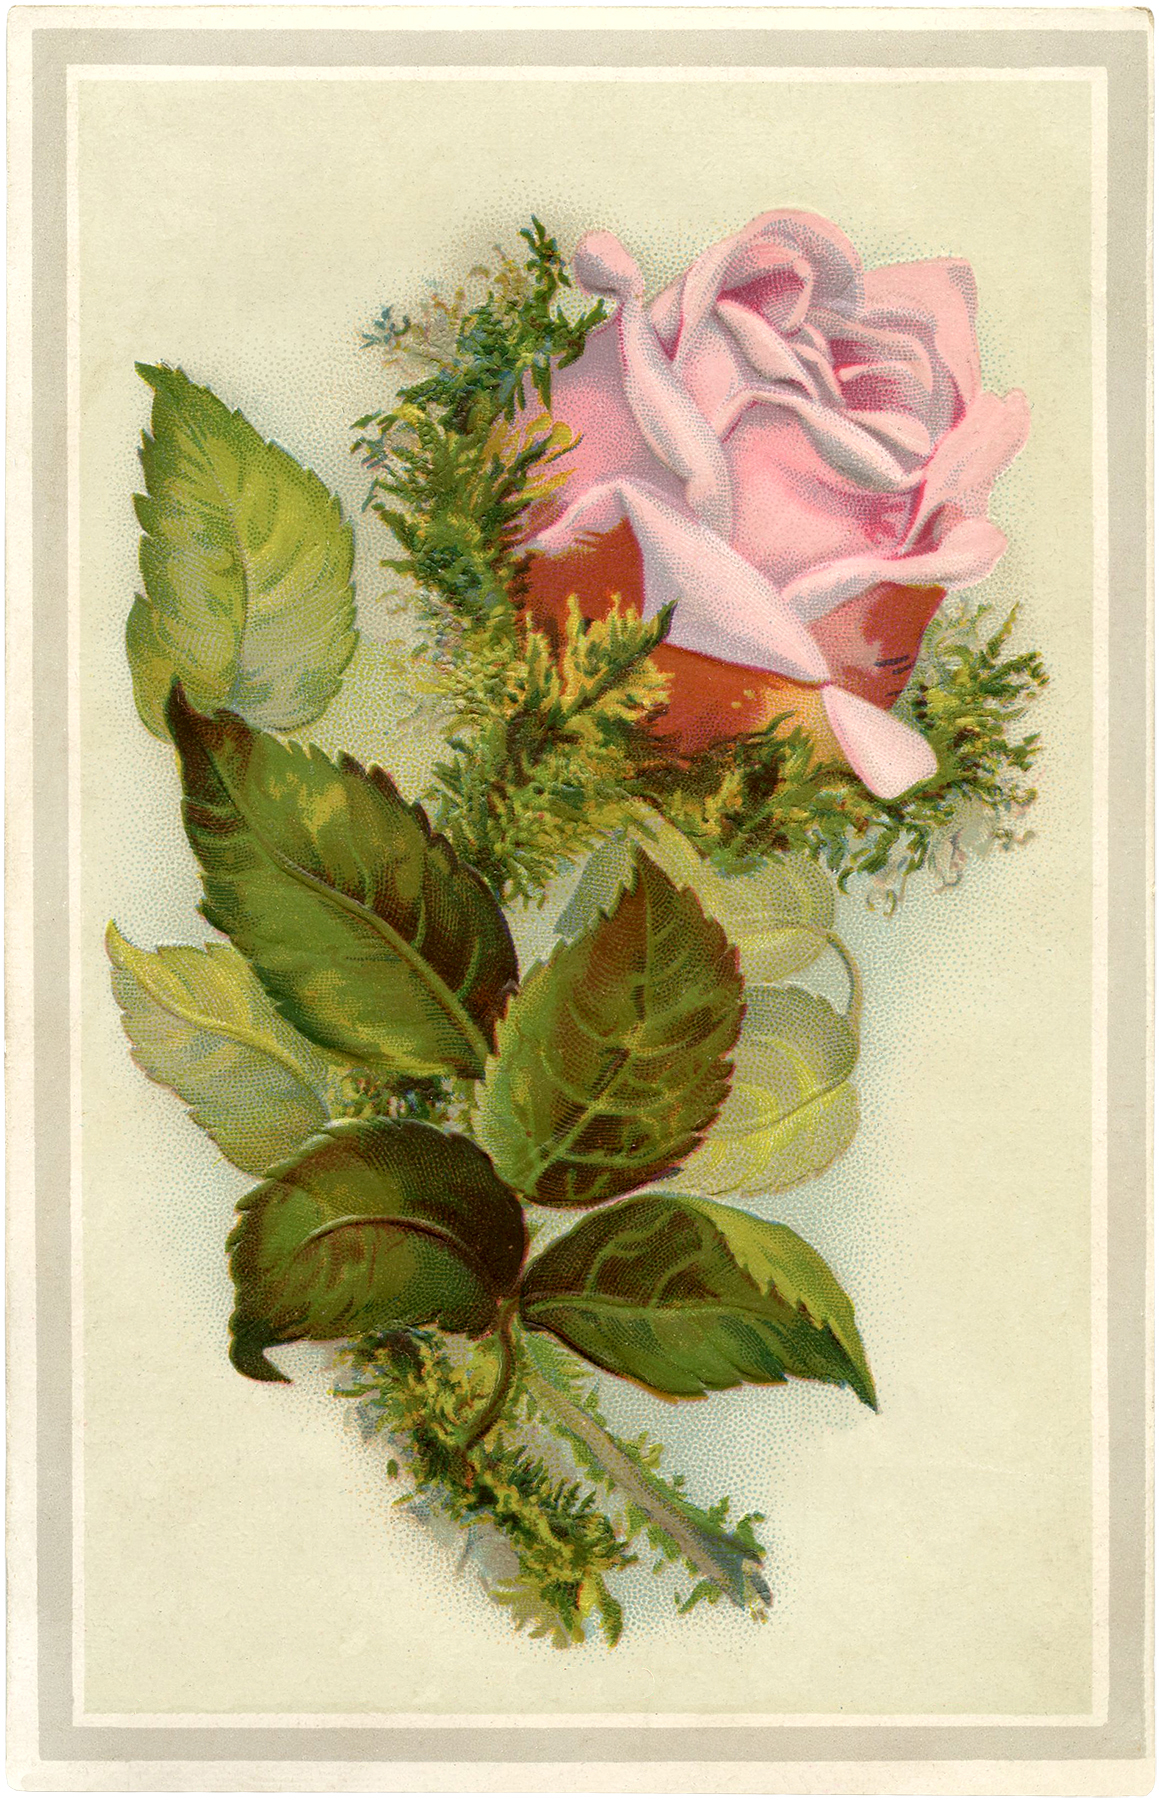 Gorgeous Vintage Pink Moss Rose Image! - The Graphics Fairy